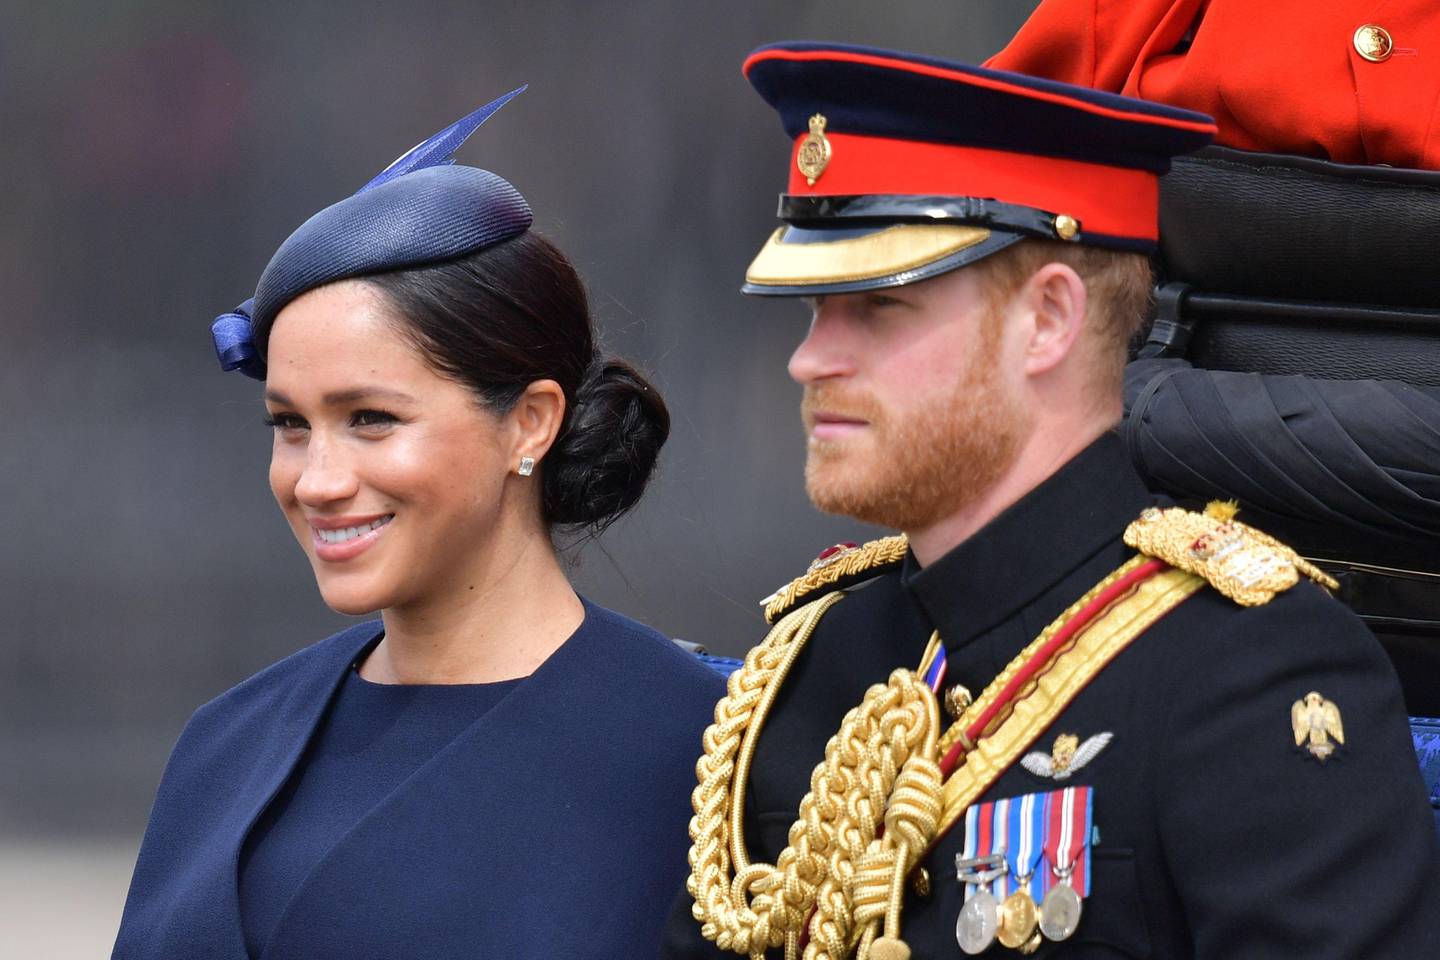 Britain's Meghan, Duchess of Sussex (L) and Britain's Prince Harry, Duke of Sussex (R) make their way in a horse drawn carriage to Horseguards parade ahead of the Queen's Birthday Parade, 'Trooping the Colour', in London on June 8, 2019. - The ceremony of Trooping the Colour is believed to have first been performed during the reign of King Charles II. Since 1748, the Trooping of the Colour has marked the official birthday of the British Sovereign. Over 1400 parading soldiers, almost 300 horses and 400 musicians take part in the event. (Photo by Daniel LEAL-OLIVAS / AFP)